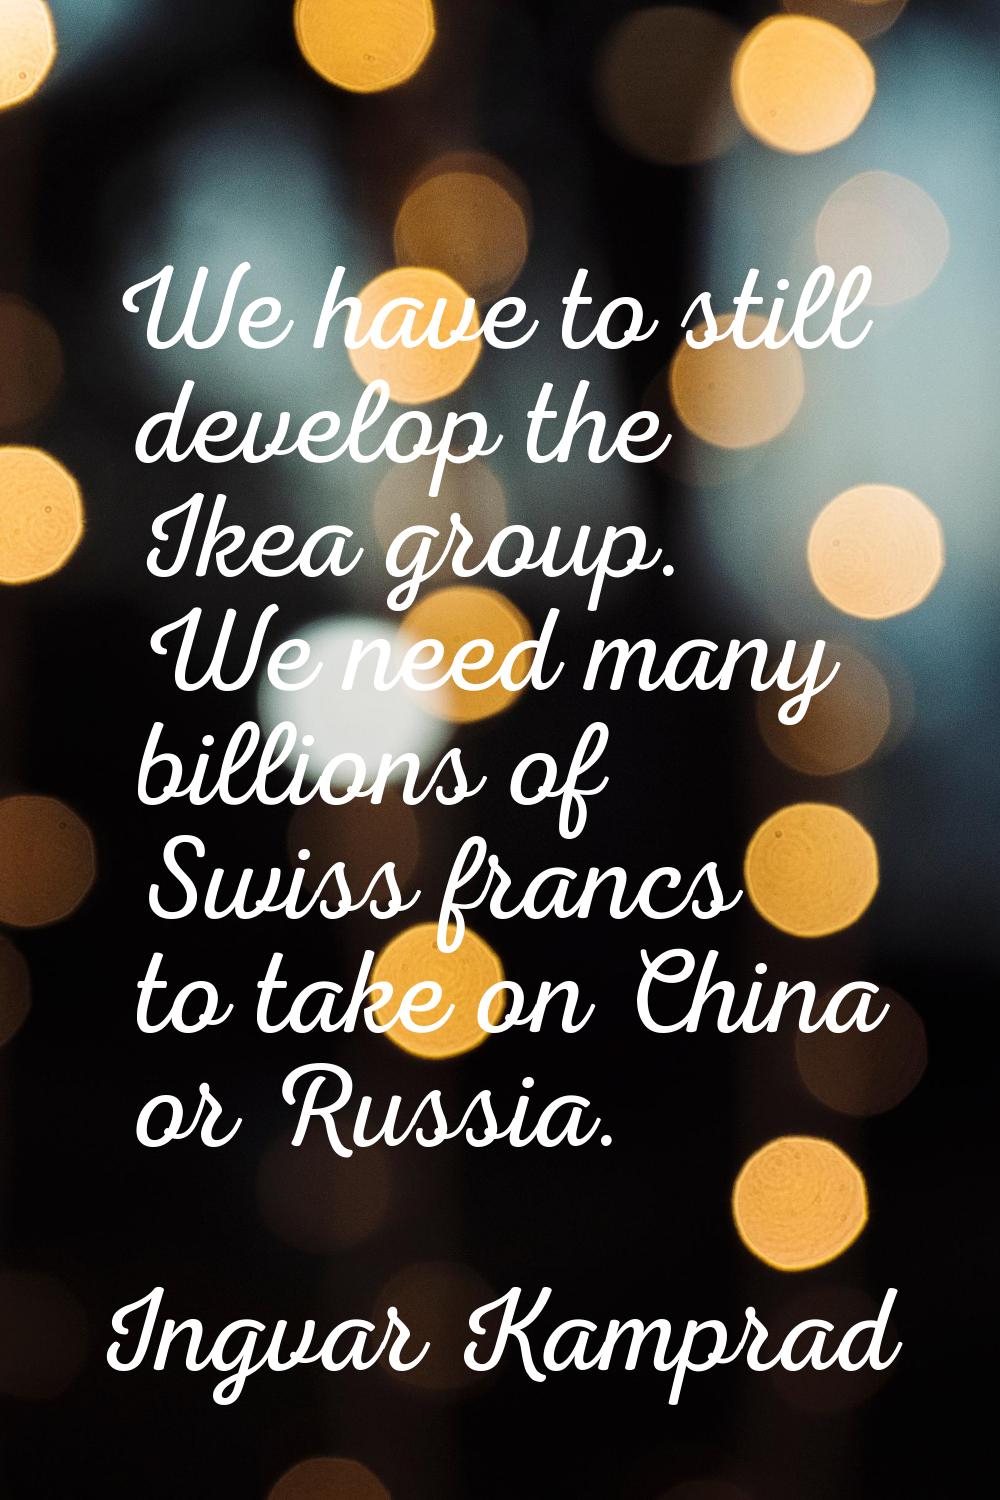 We have to still develop the Ikea group. We need many billions of Swiss francs to take on China or 